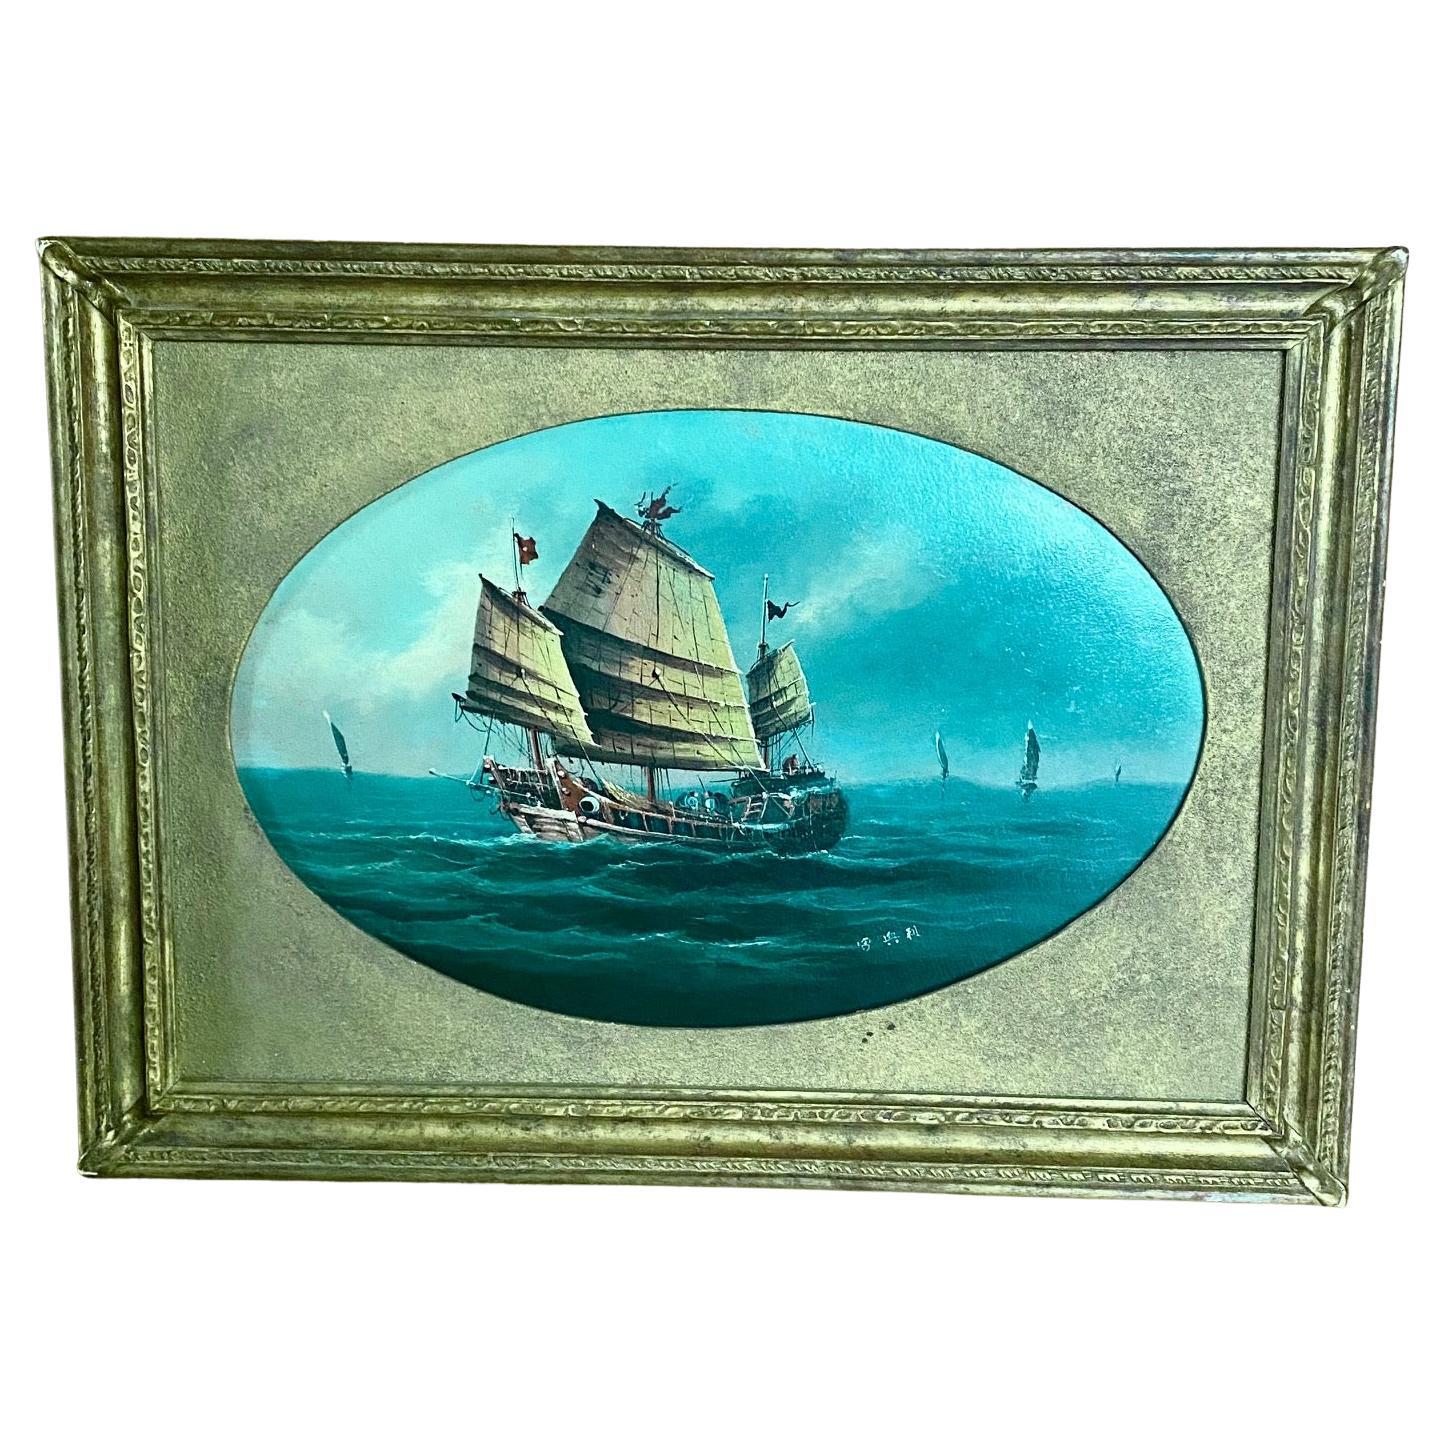 19th Century China Trade Seascape with a Junk, Signed, circa 1870 For Sale